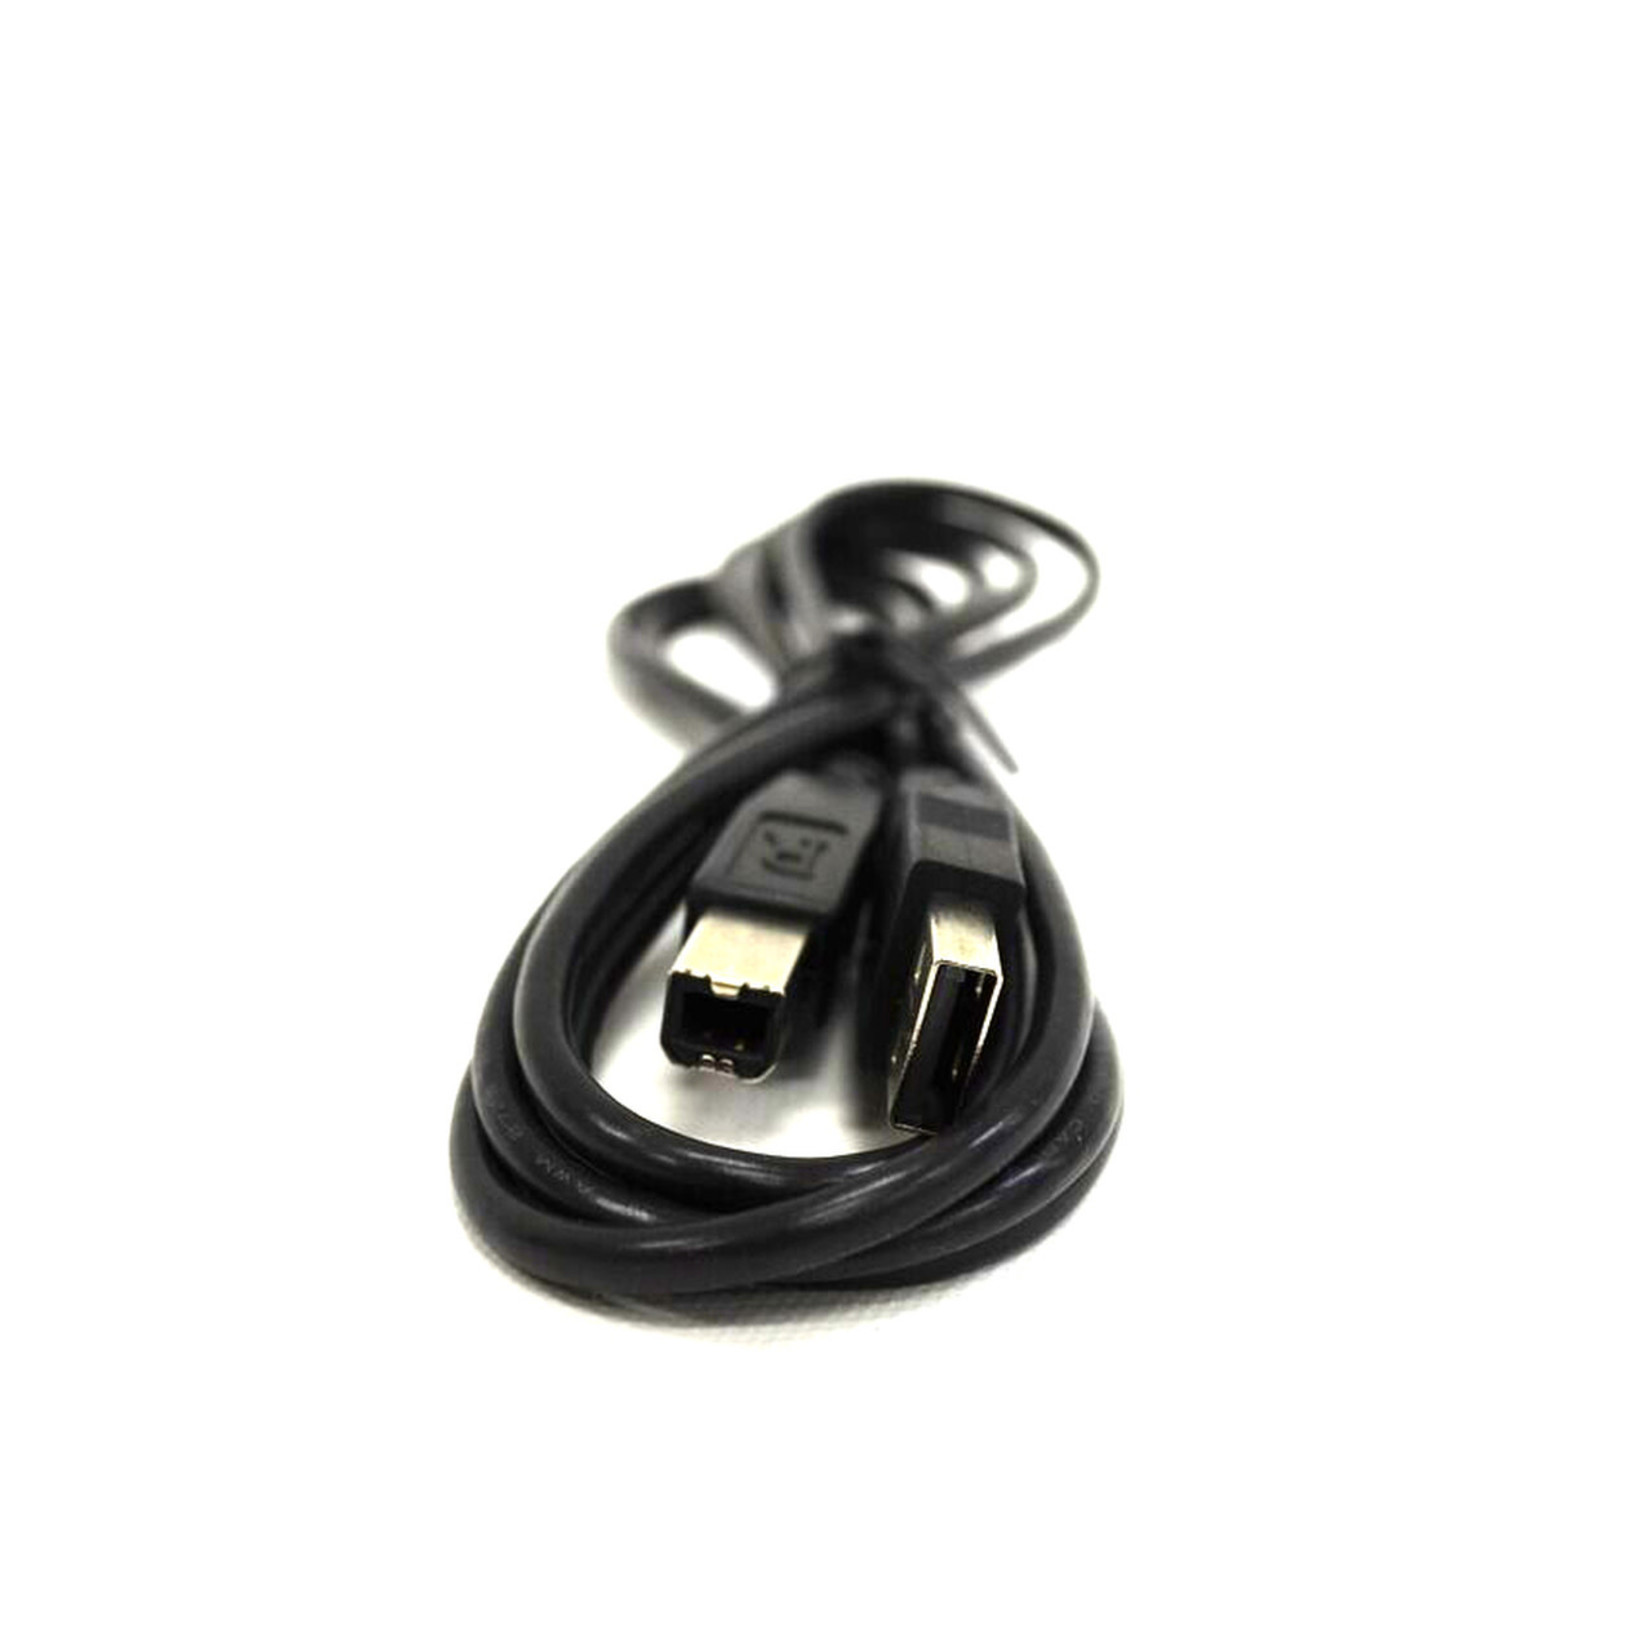 USB Type A to B Cord